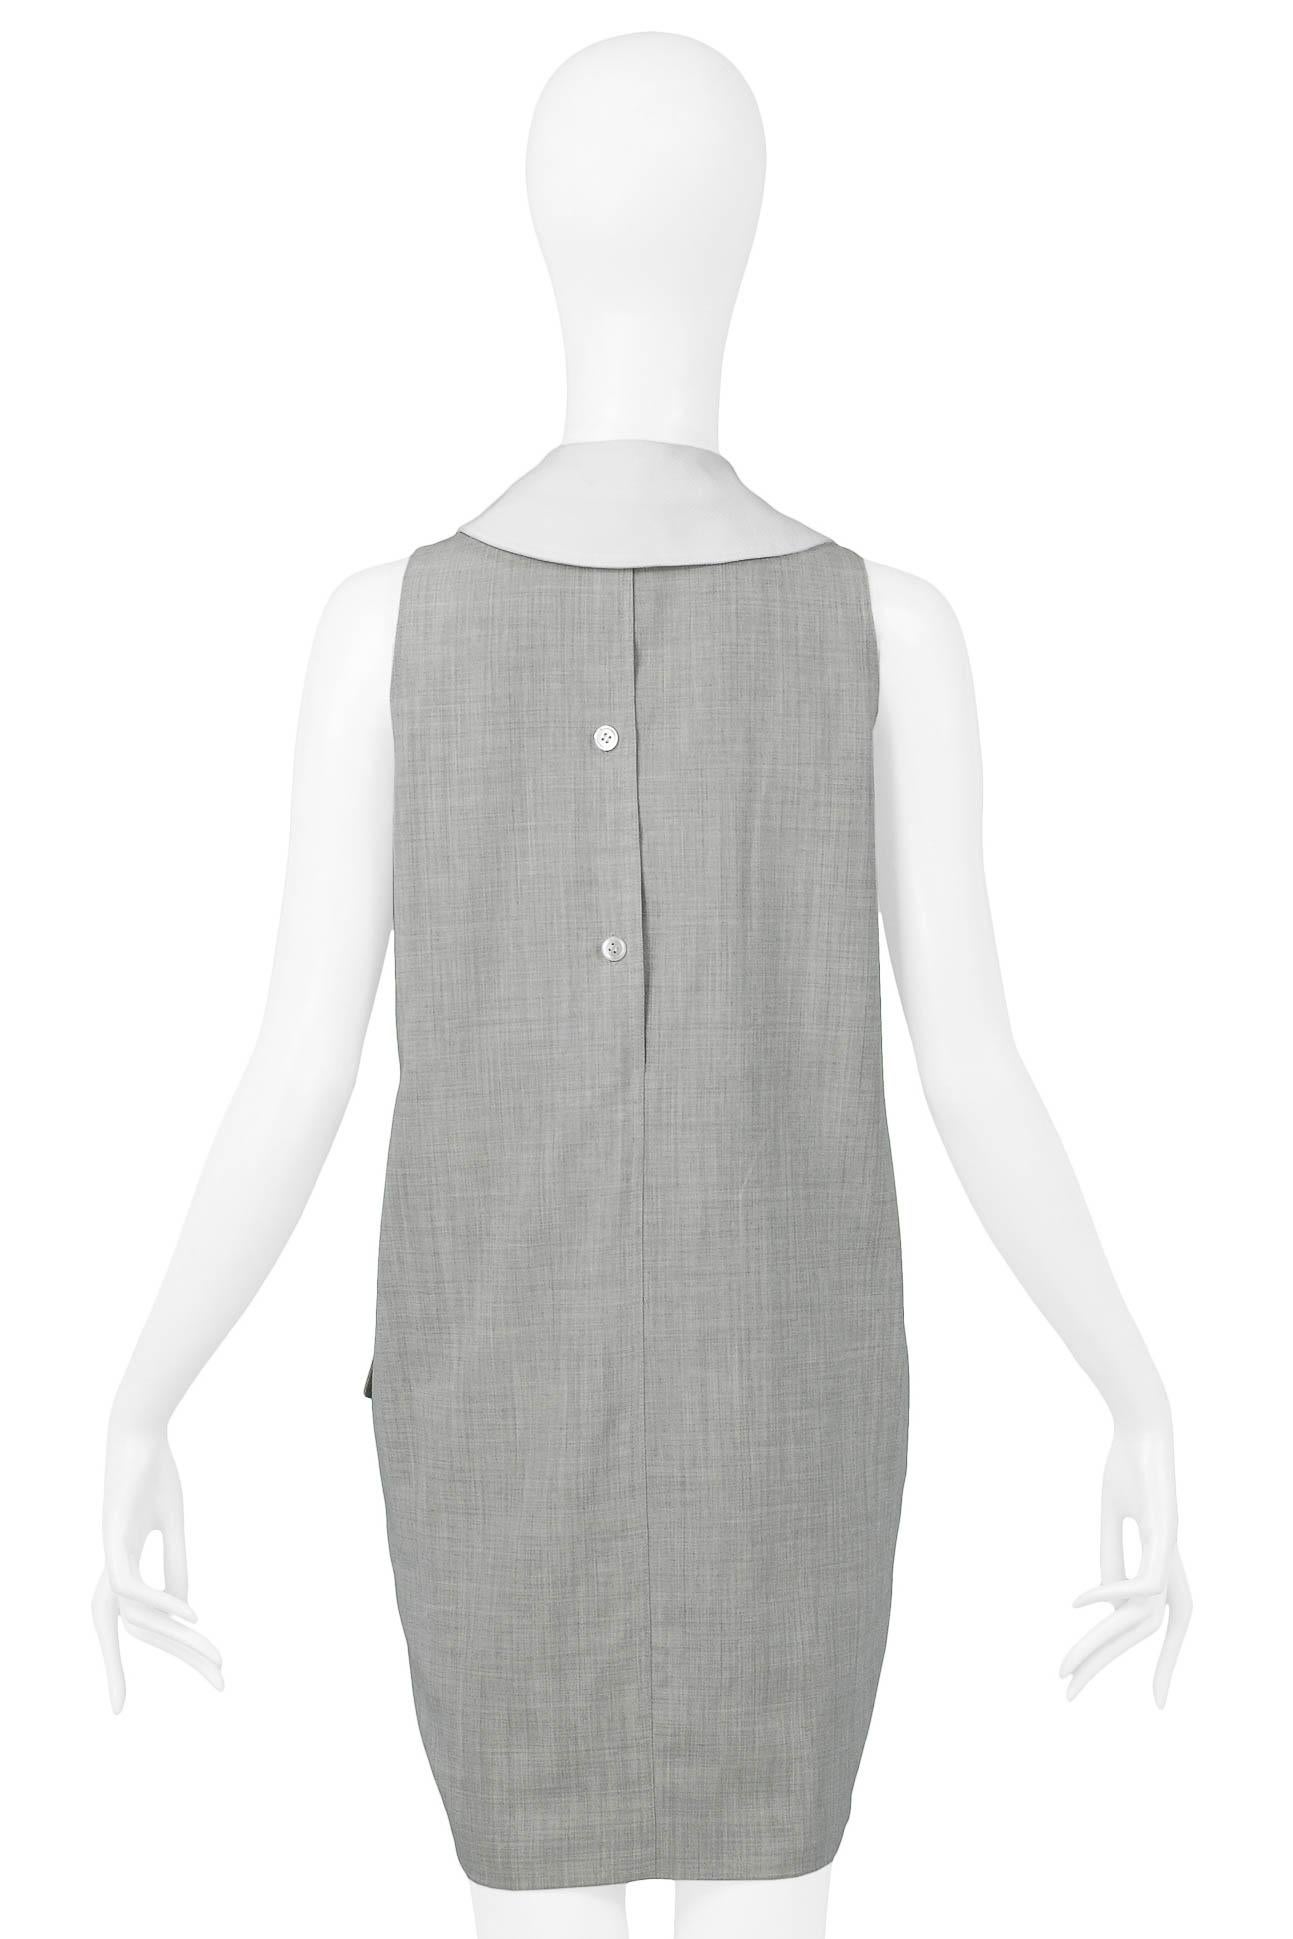 Women's Issac Mizrahi Grey Dress With Pink Bow 1991 For Sale